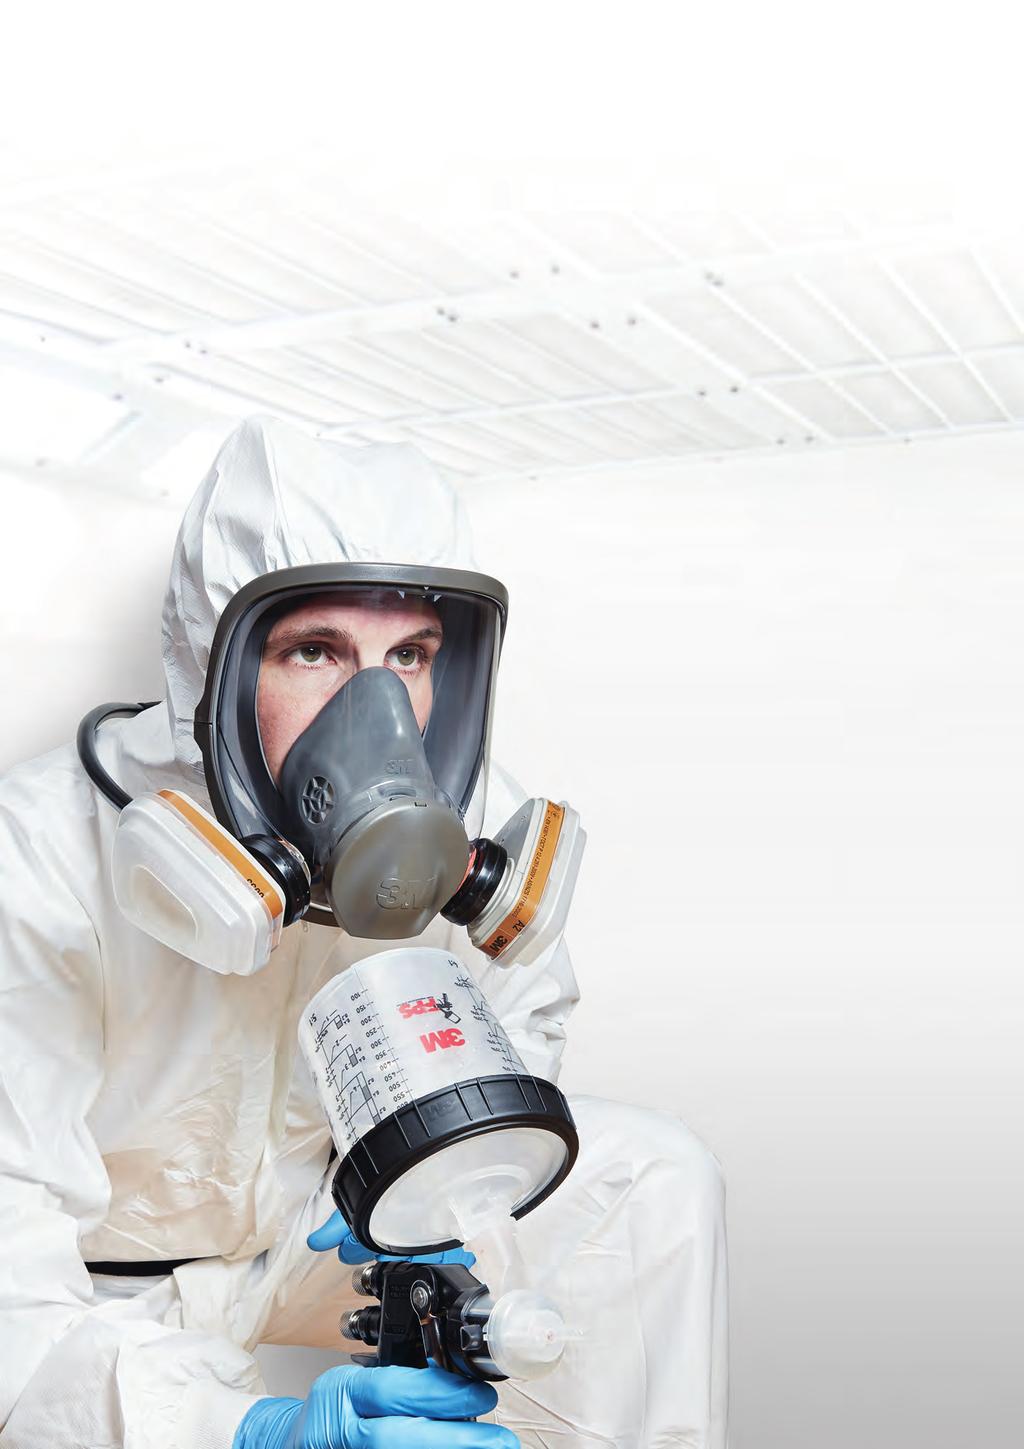 The New 3M S-200+ Supplied Air Respirator System Engineered for comfort and security Introduction The 3M Supplied Air Respirator System S-200+ is a comfortable and versatile supplied air respirator